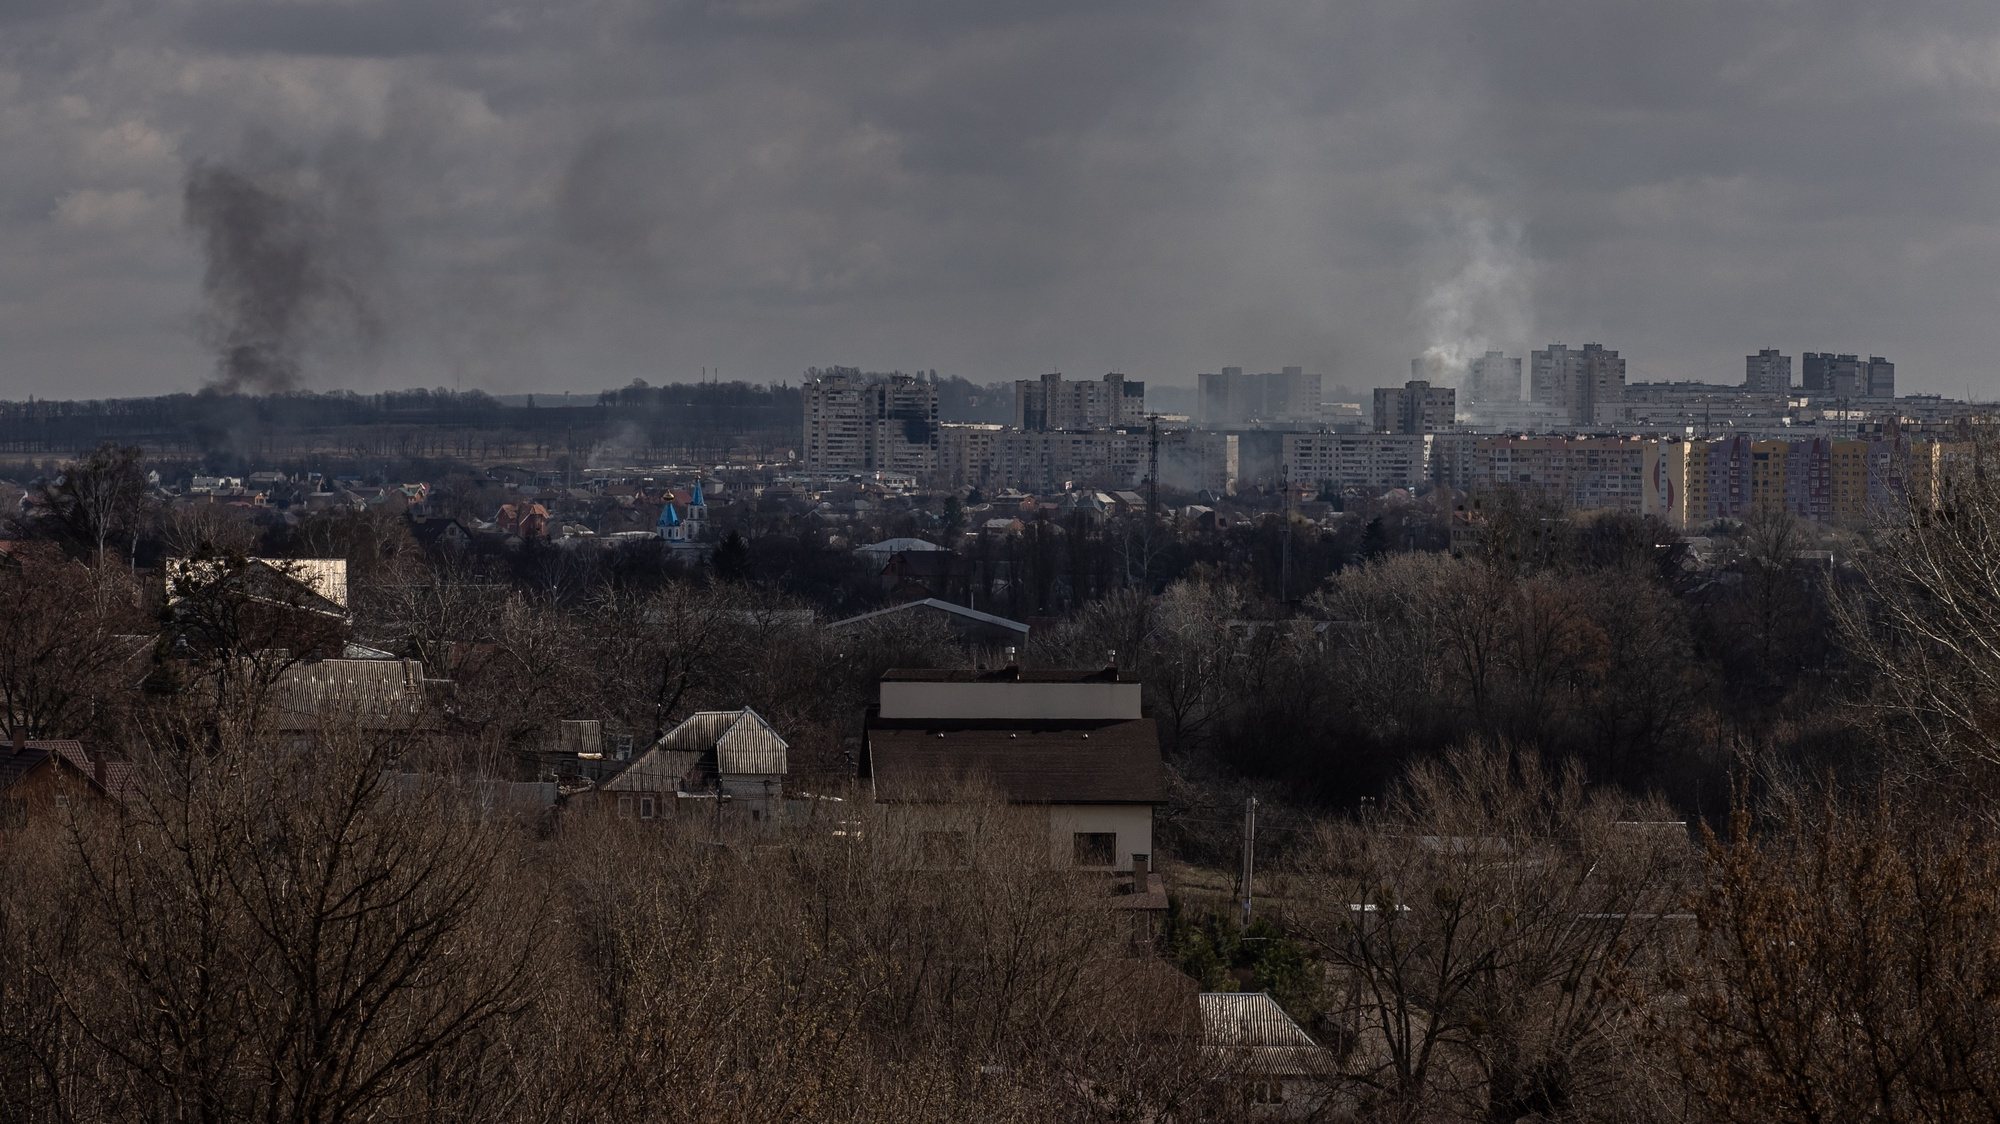 epa09870878 Smoke after shelling rises from a residential area as Russia&#039;s attack on Ukraine continues, in Kharkiv, northeast Ukraine, 04 April 2022. Kharkiv, Ukraine&#039;s second-largest city of 1.5 million people, which lies about 25 miles from the Russian border, and its area around have been heavily shelled by Russian forces for over a month, with many civilians killed, following the invasion on 24 February.  EPA/ROMAN PILIPEY